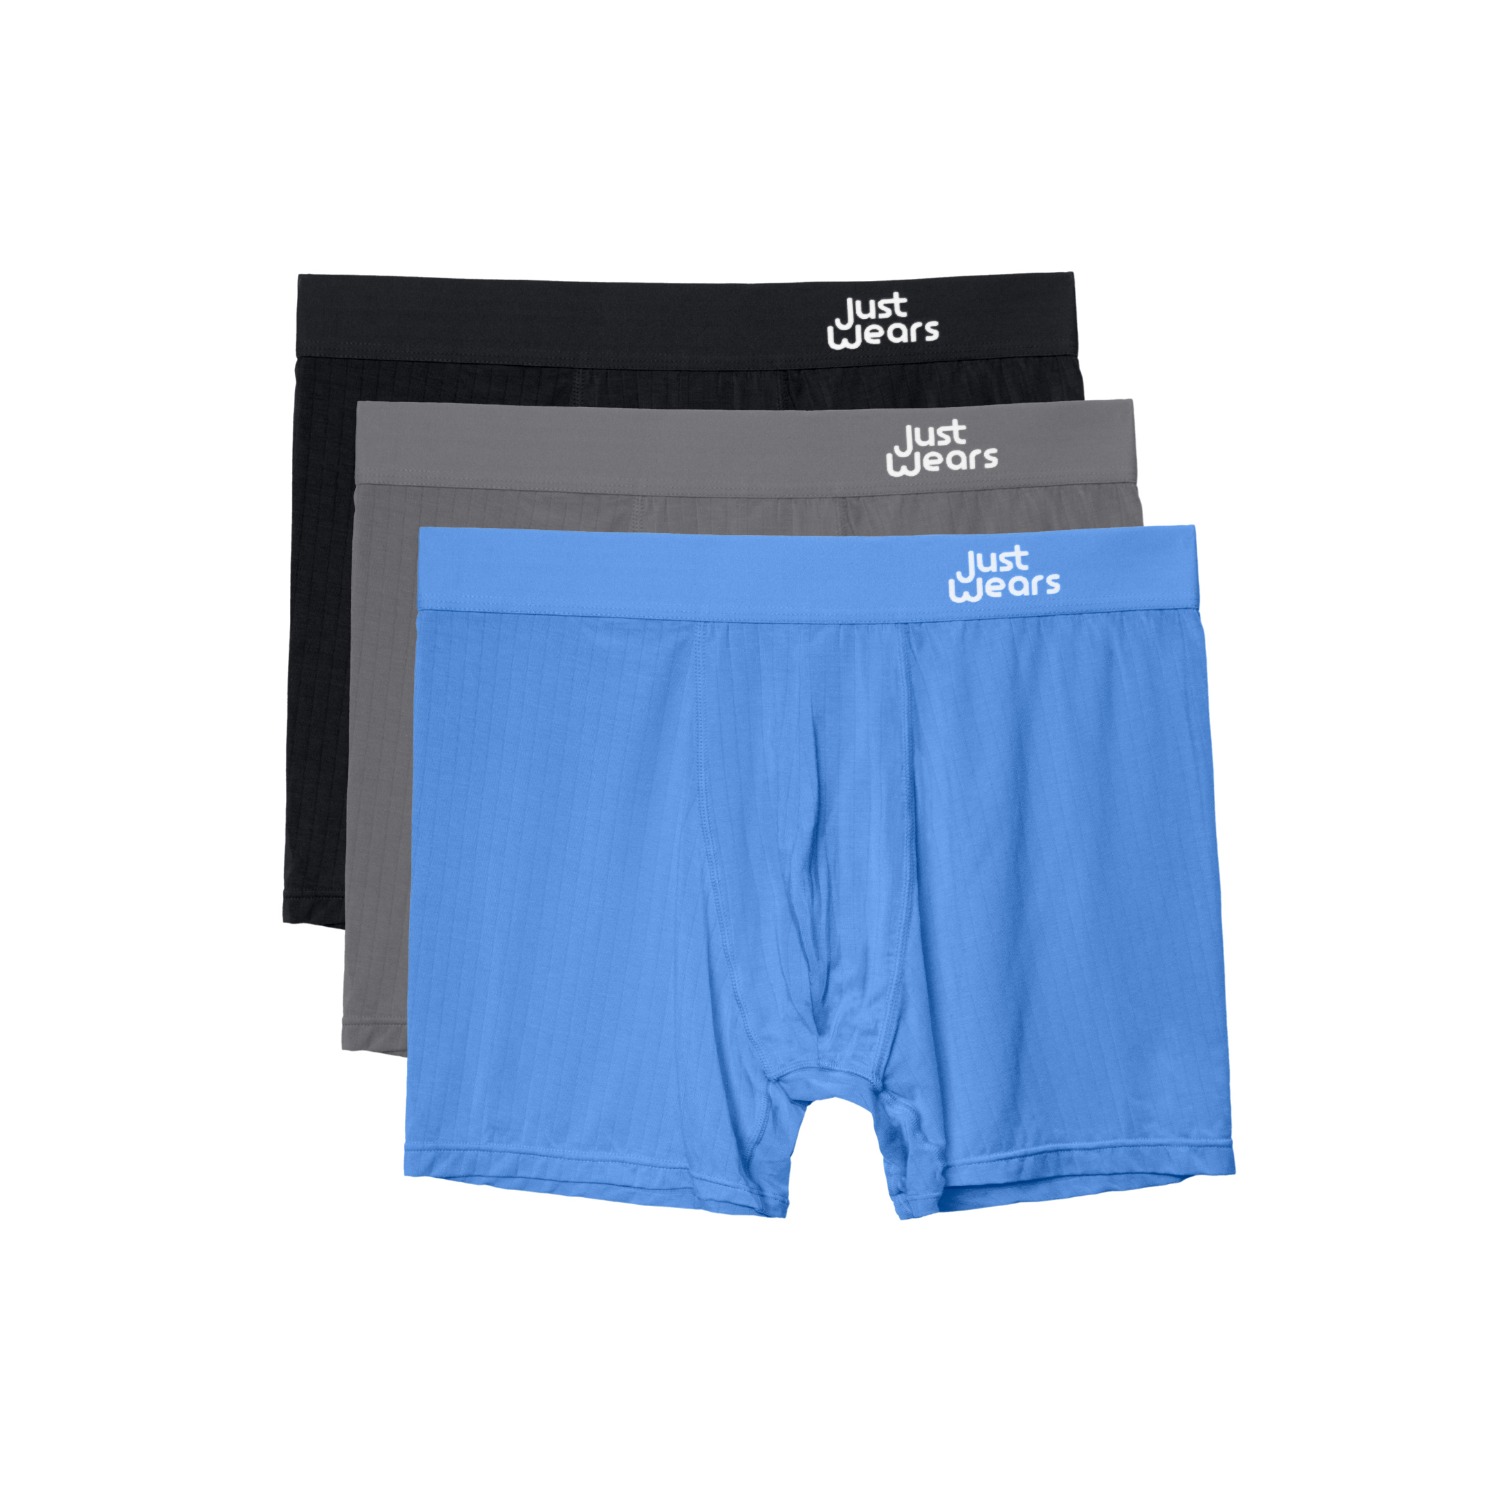 SuperSoft Cotton Micromodal Blend Briefs 2 Pack